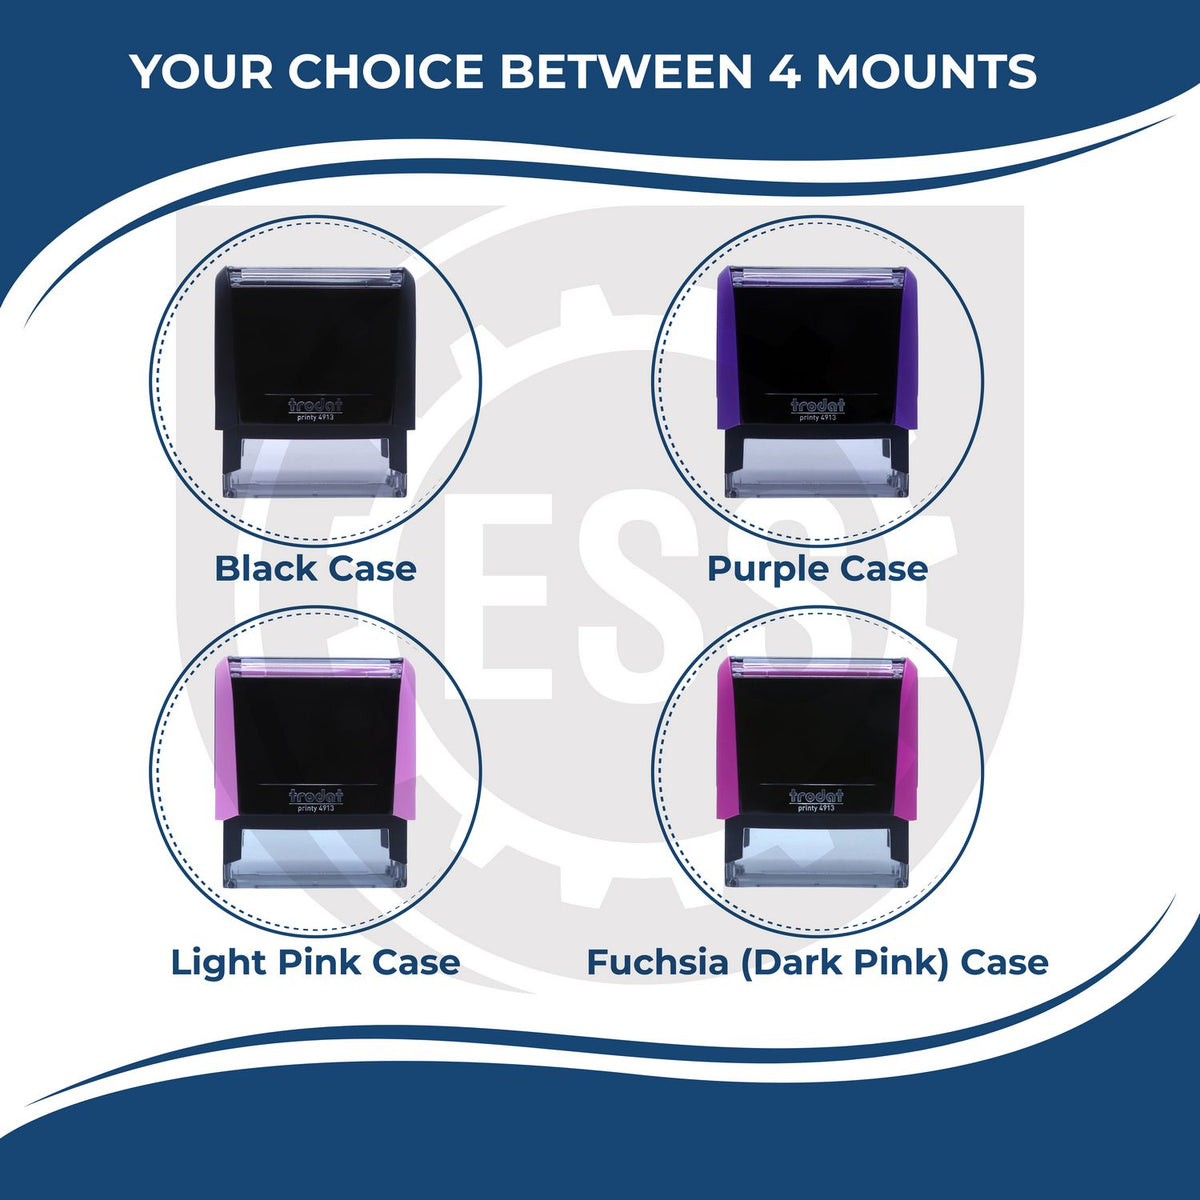 A picture of different colored mounts for the Self-Inking State Seal New Mexico Notary Stamp featurning a Red, Blue or Black Mount